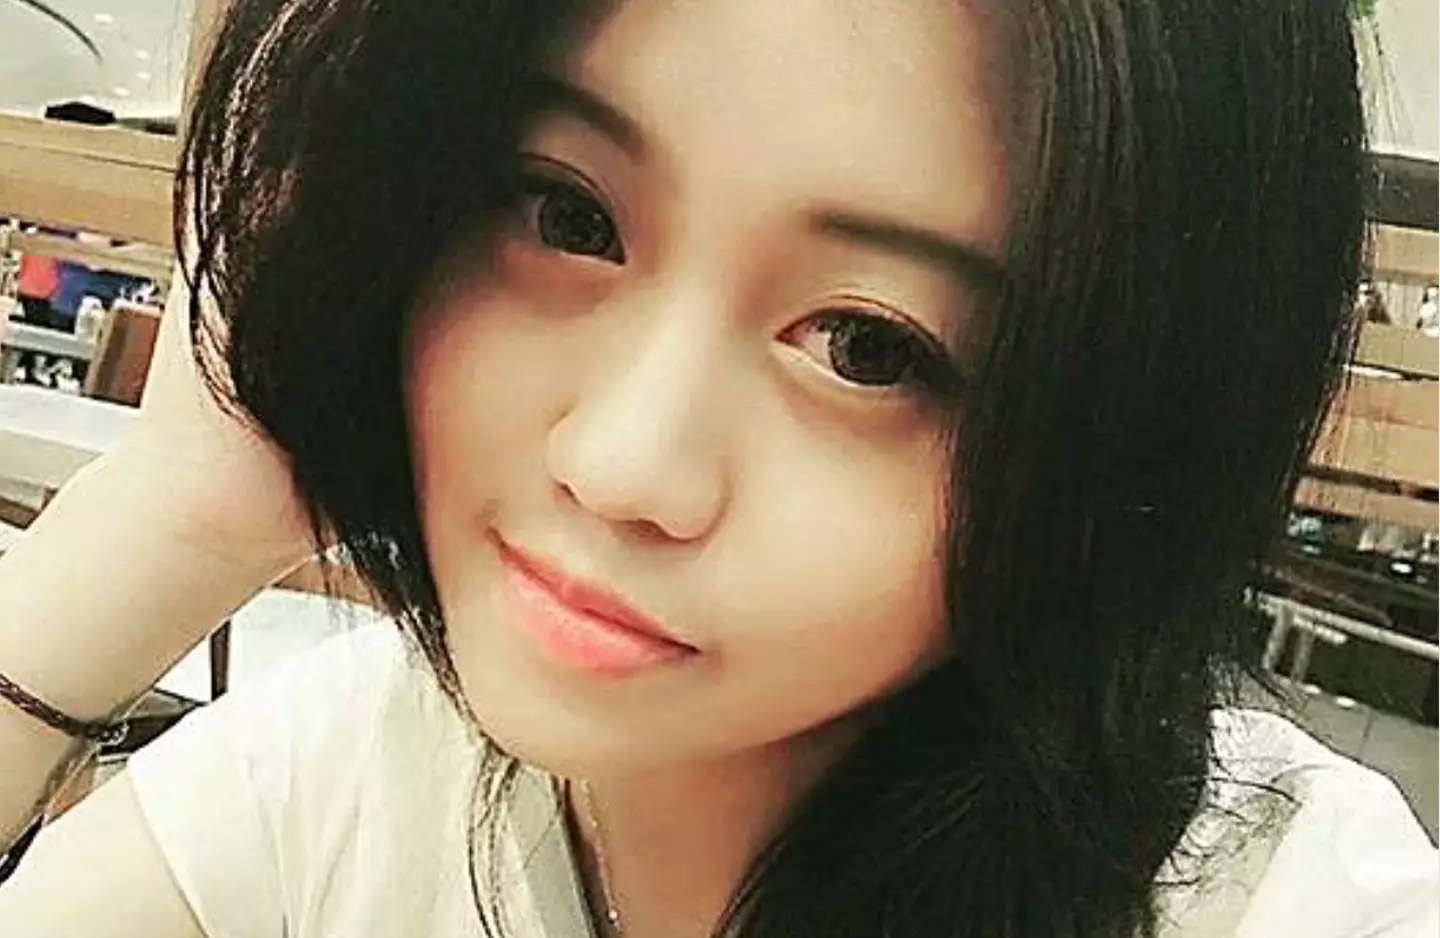 Christine Jiaxin Lee was arrested when trying to leave Australia.